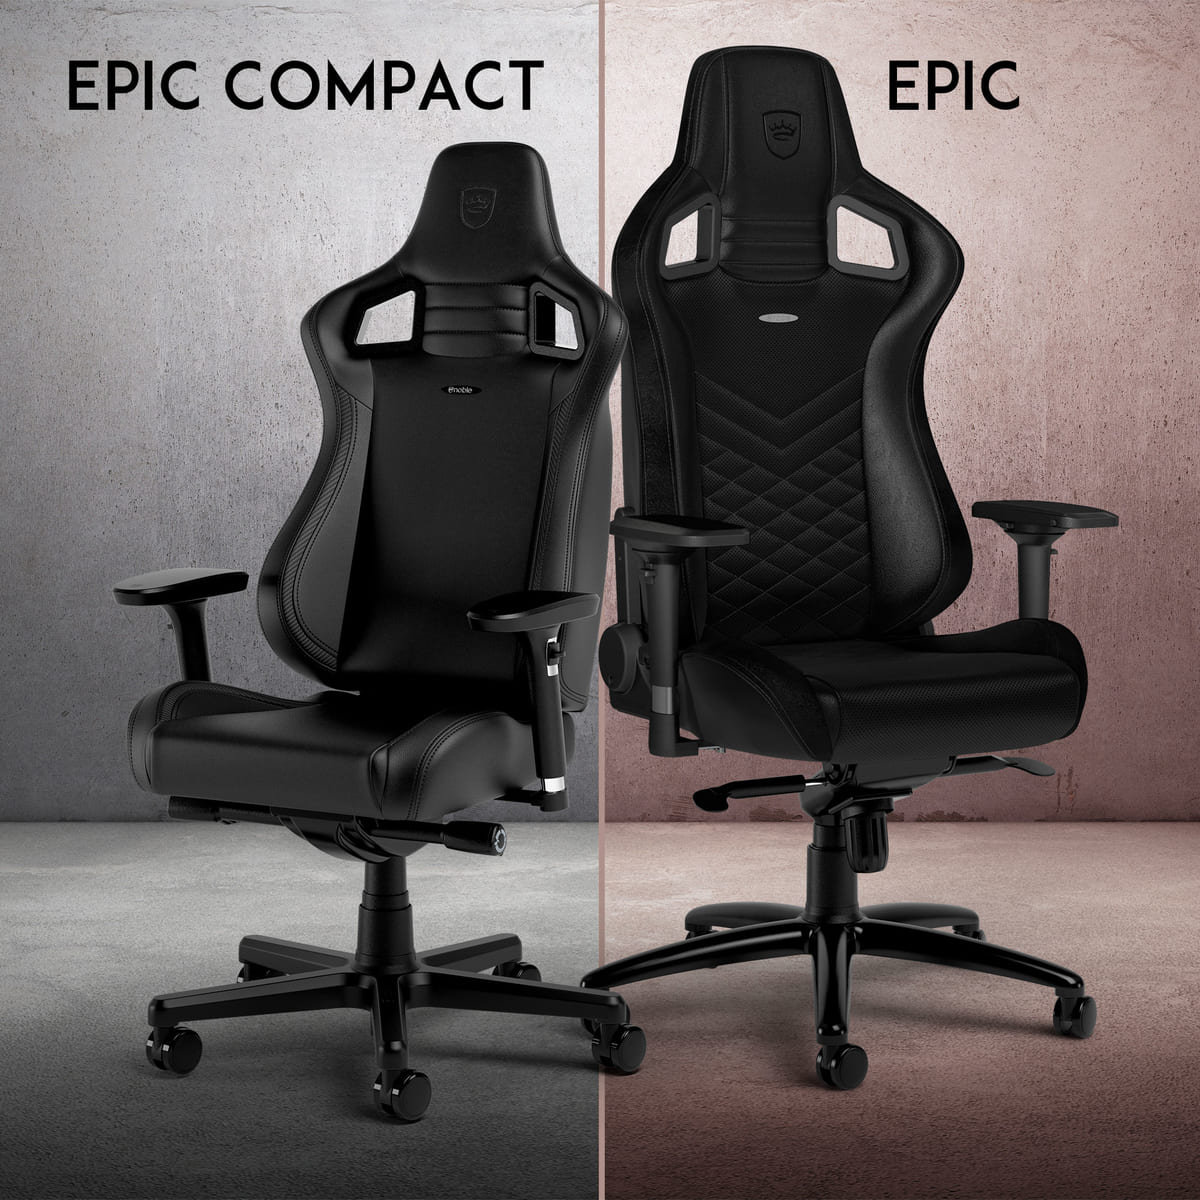 noblechairs(ノーブルチェアーズ)「EPIC COMPACT」６